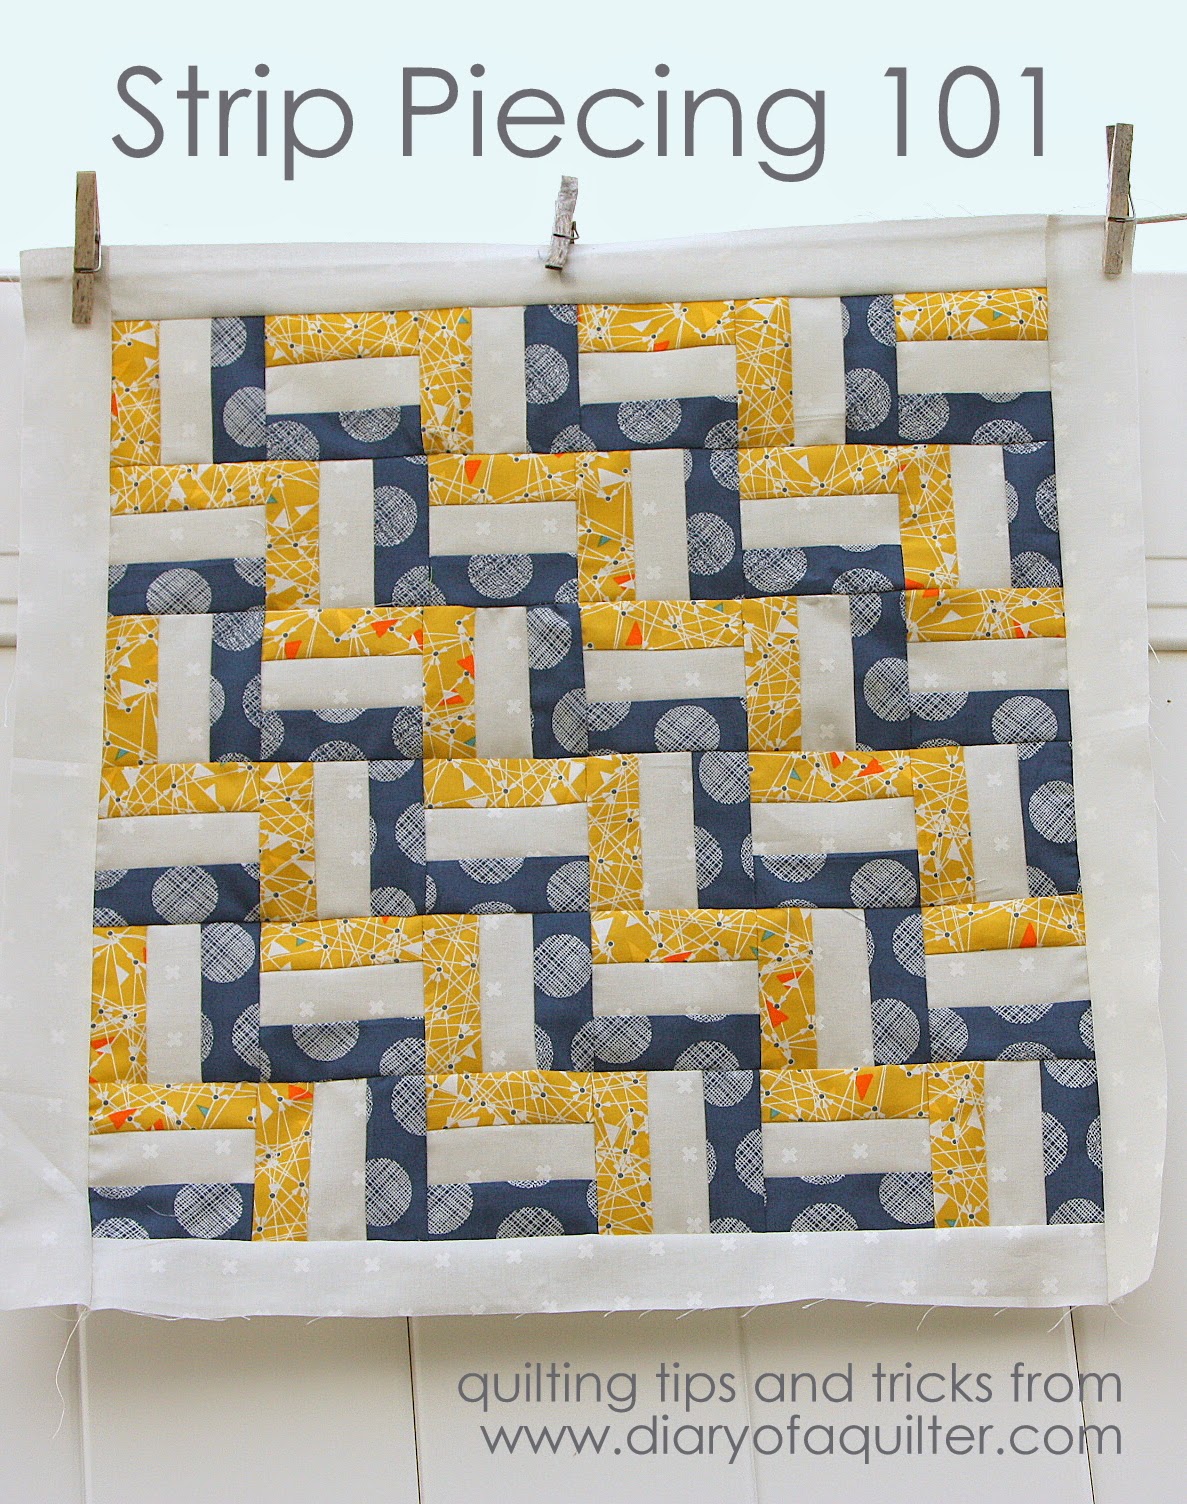 Strip Piecing a Quilt tips and tricks basics